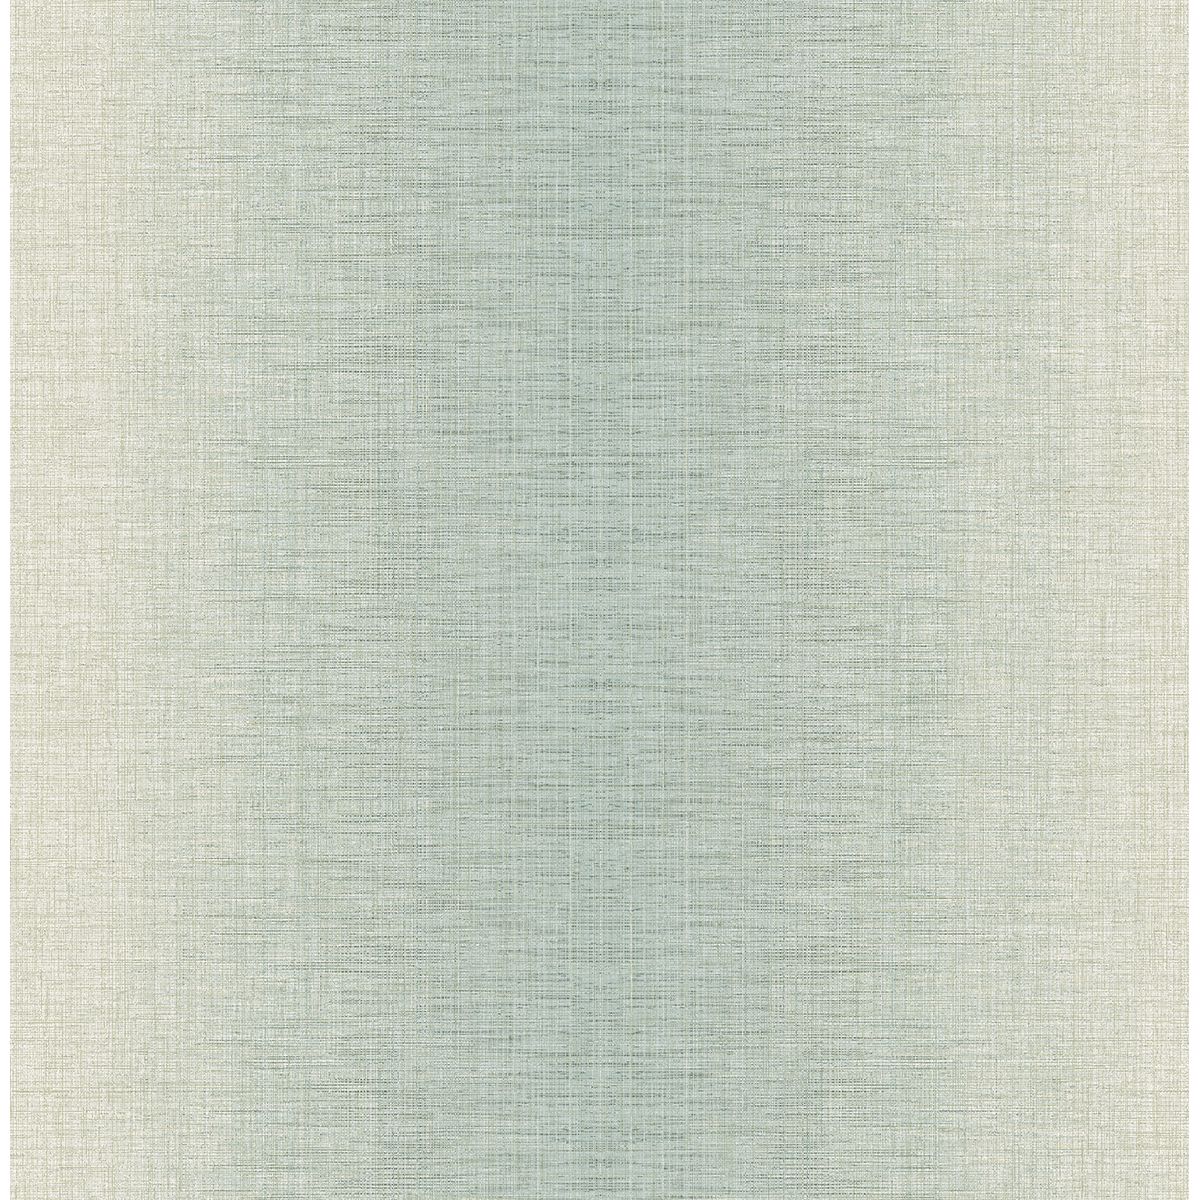 Sample Stardust Ombre Wallpaper in Mint from the Moonlight Collection by Brewster Home Fashions